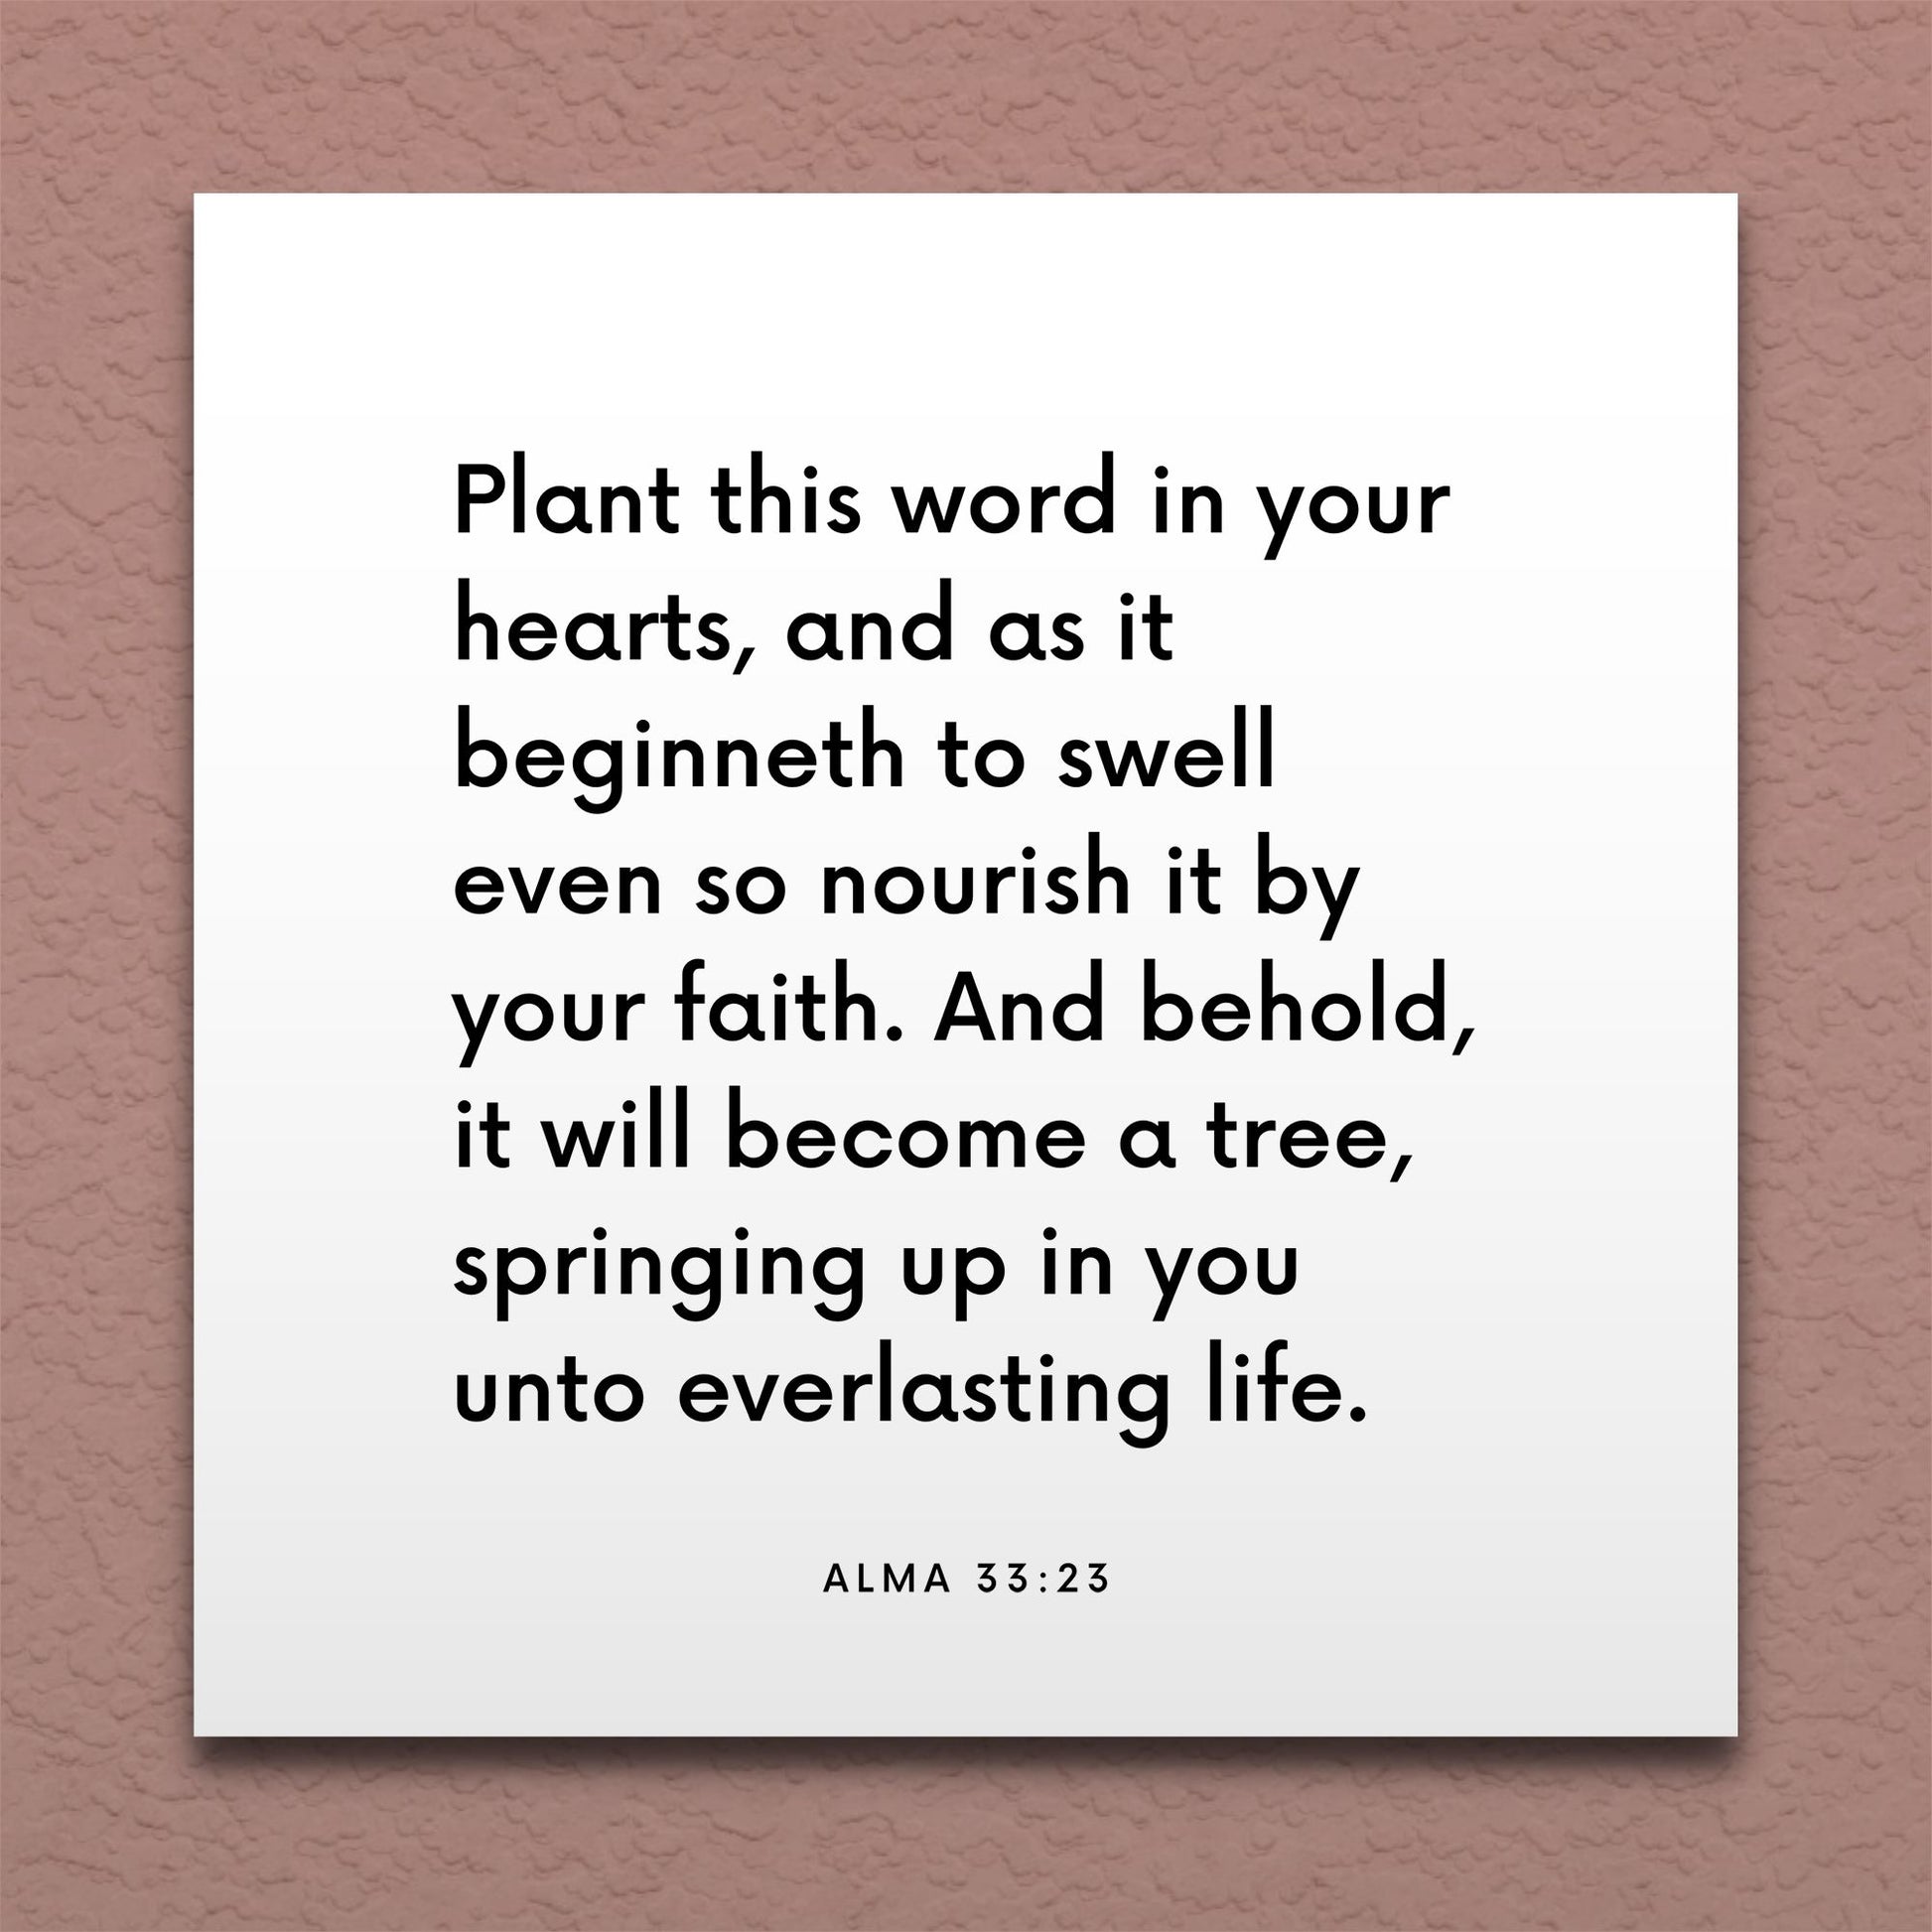 Wall-mounted scripture tile for Alma 33:23 - "Plant this word in your hearts"